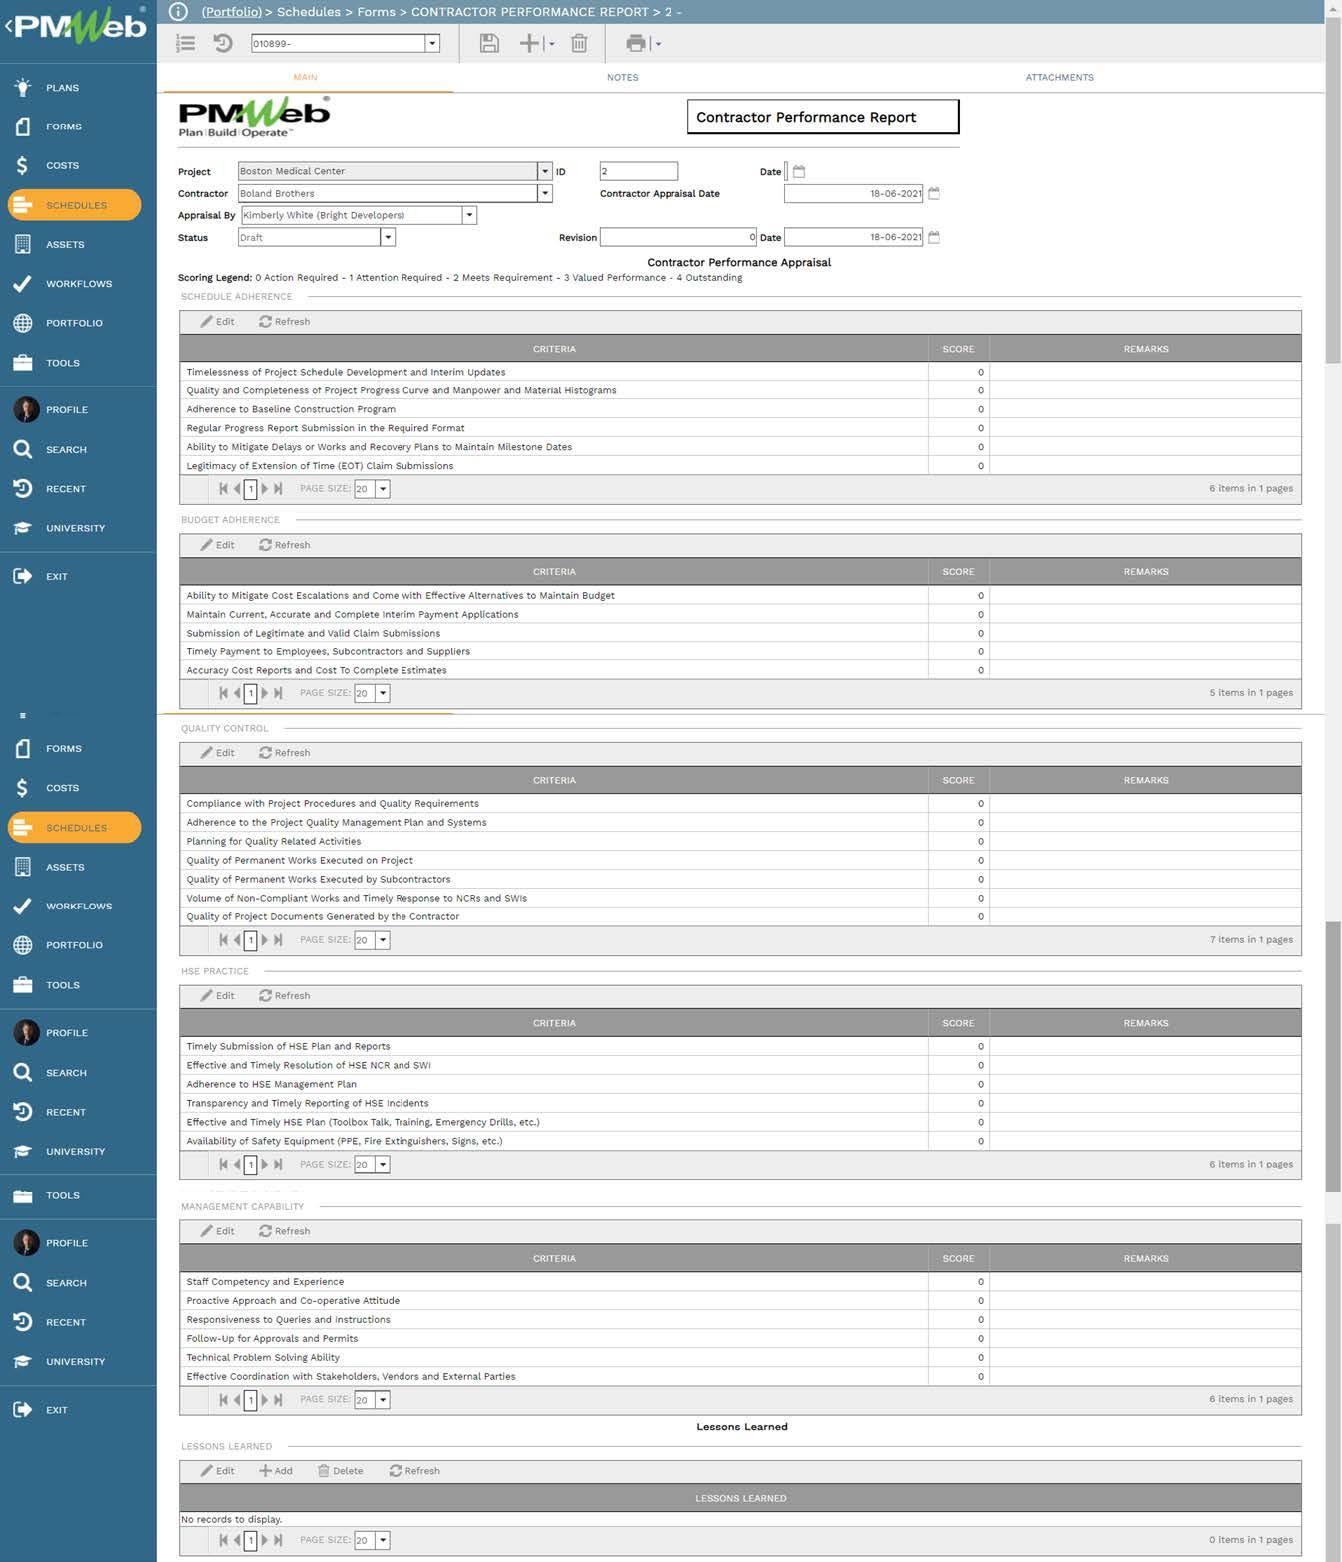 PMWeb 7 Schedules Forms Contractor Performance Report 